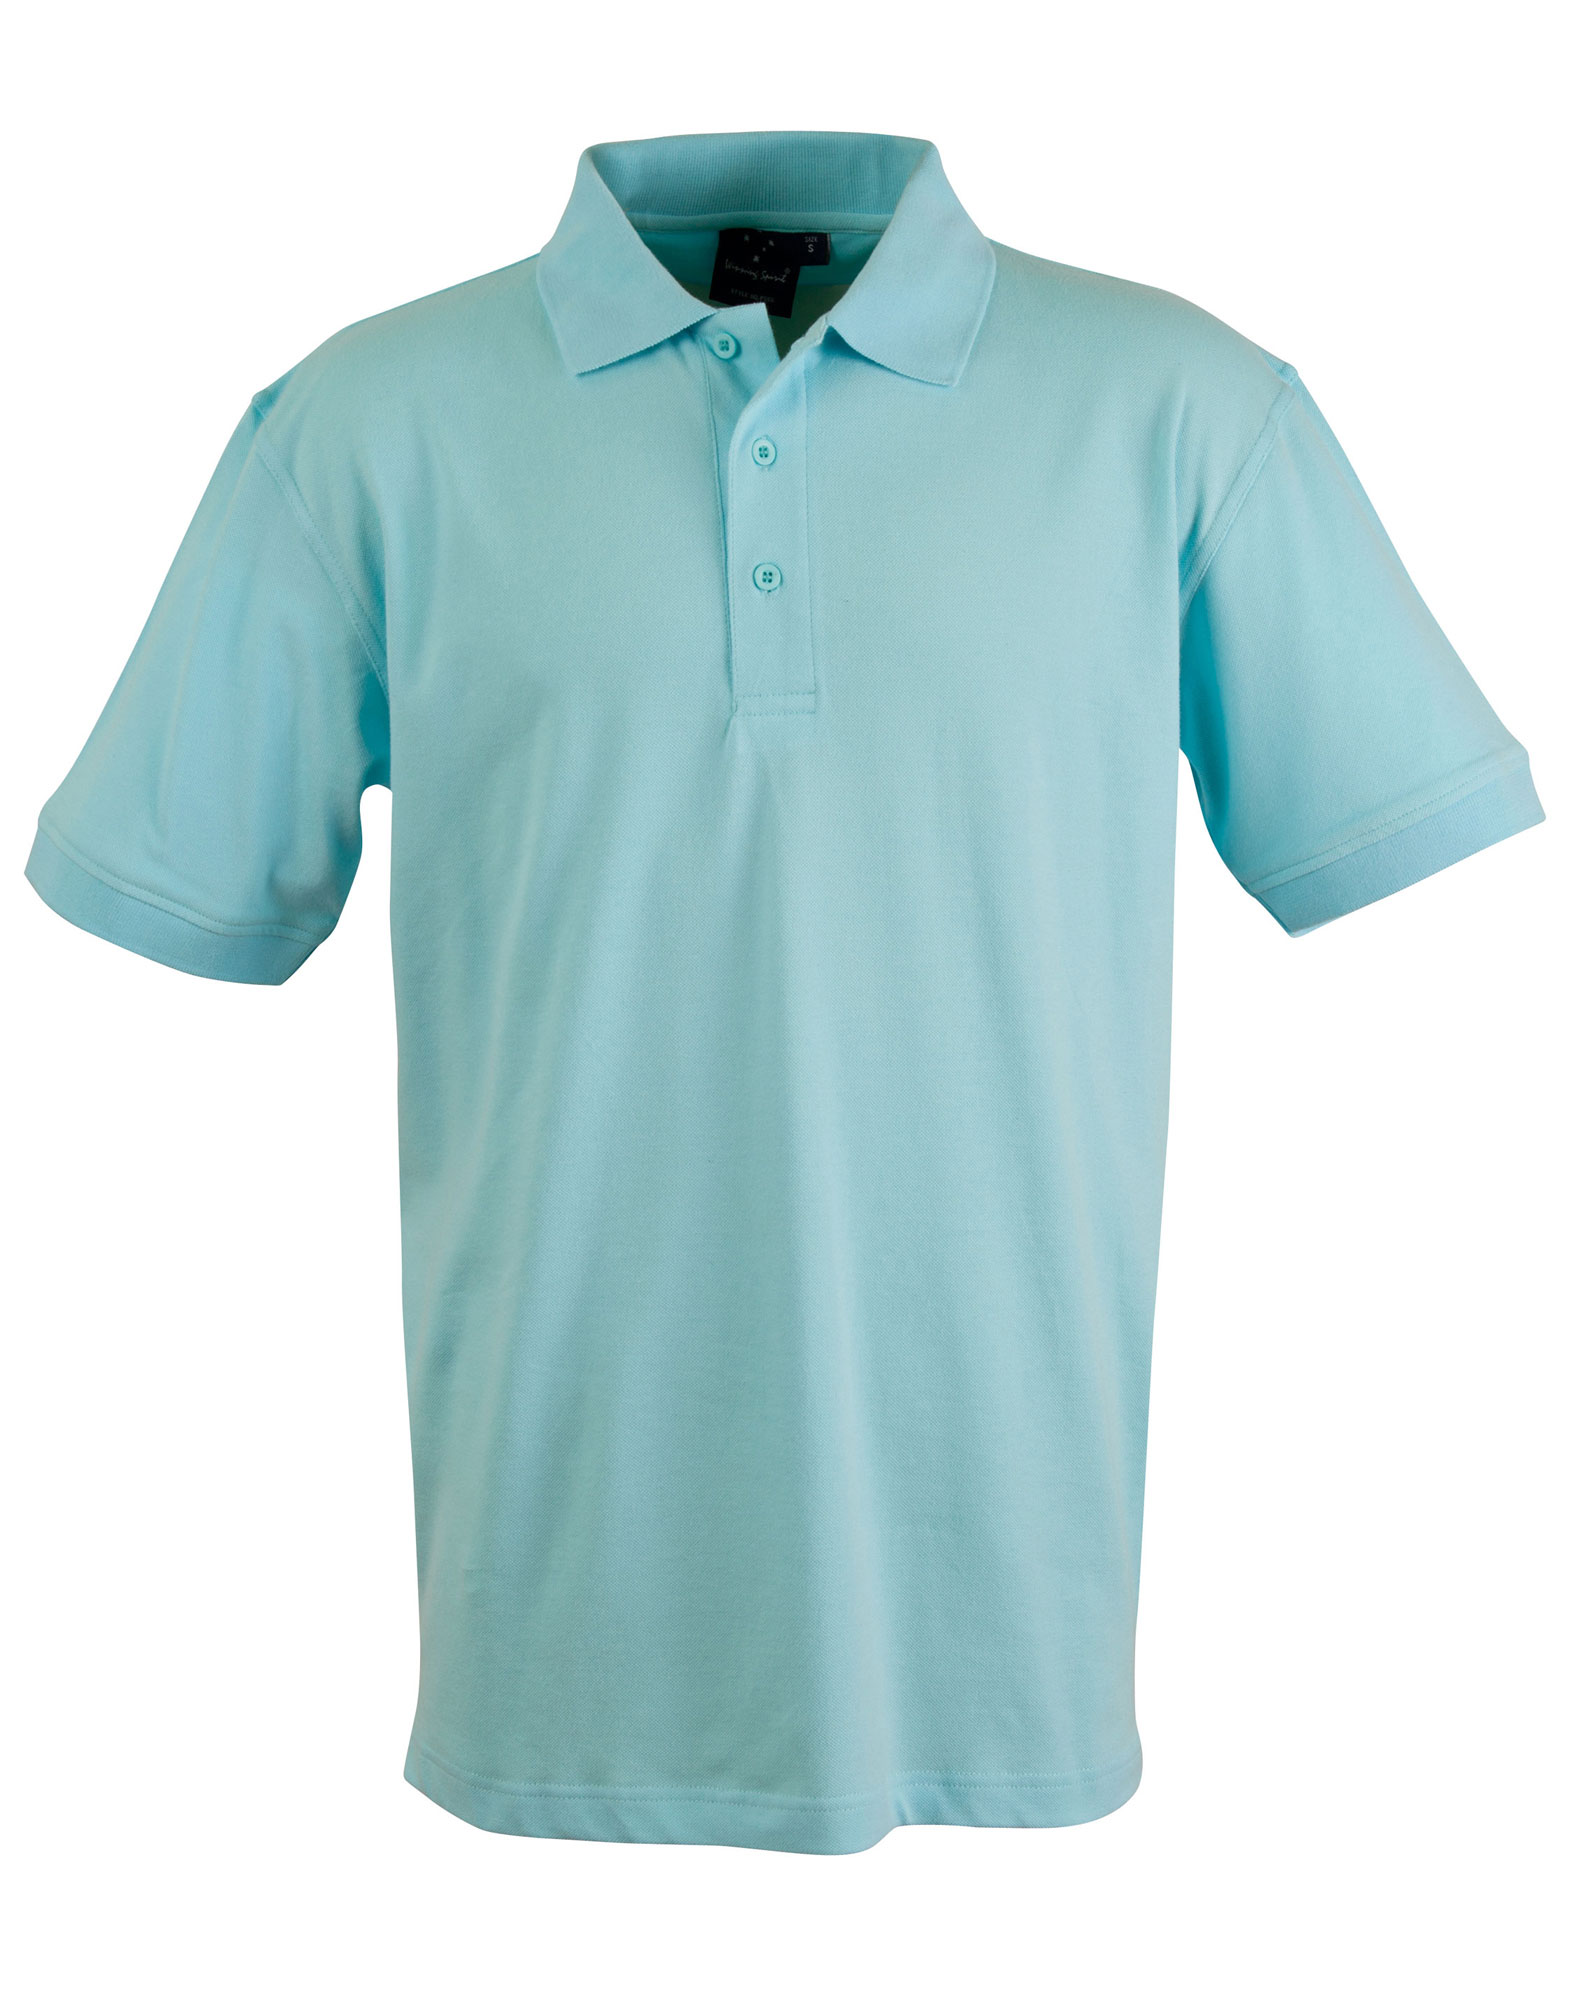 MENS COTTON STRETCH SHORT SLEEVE POLO